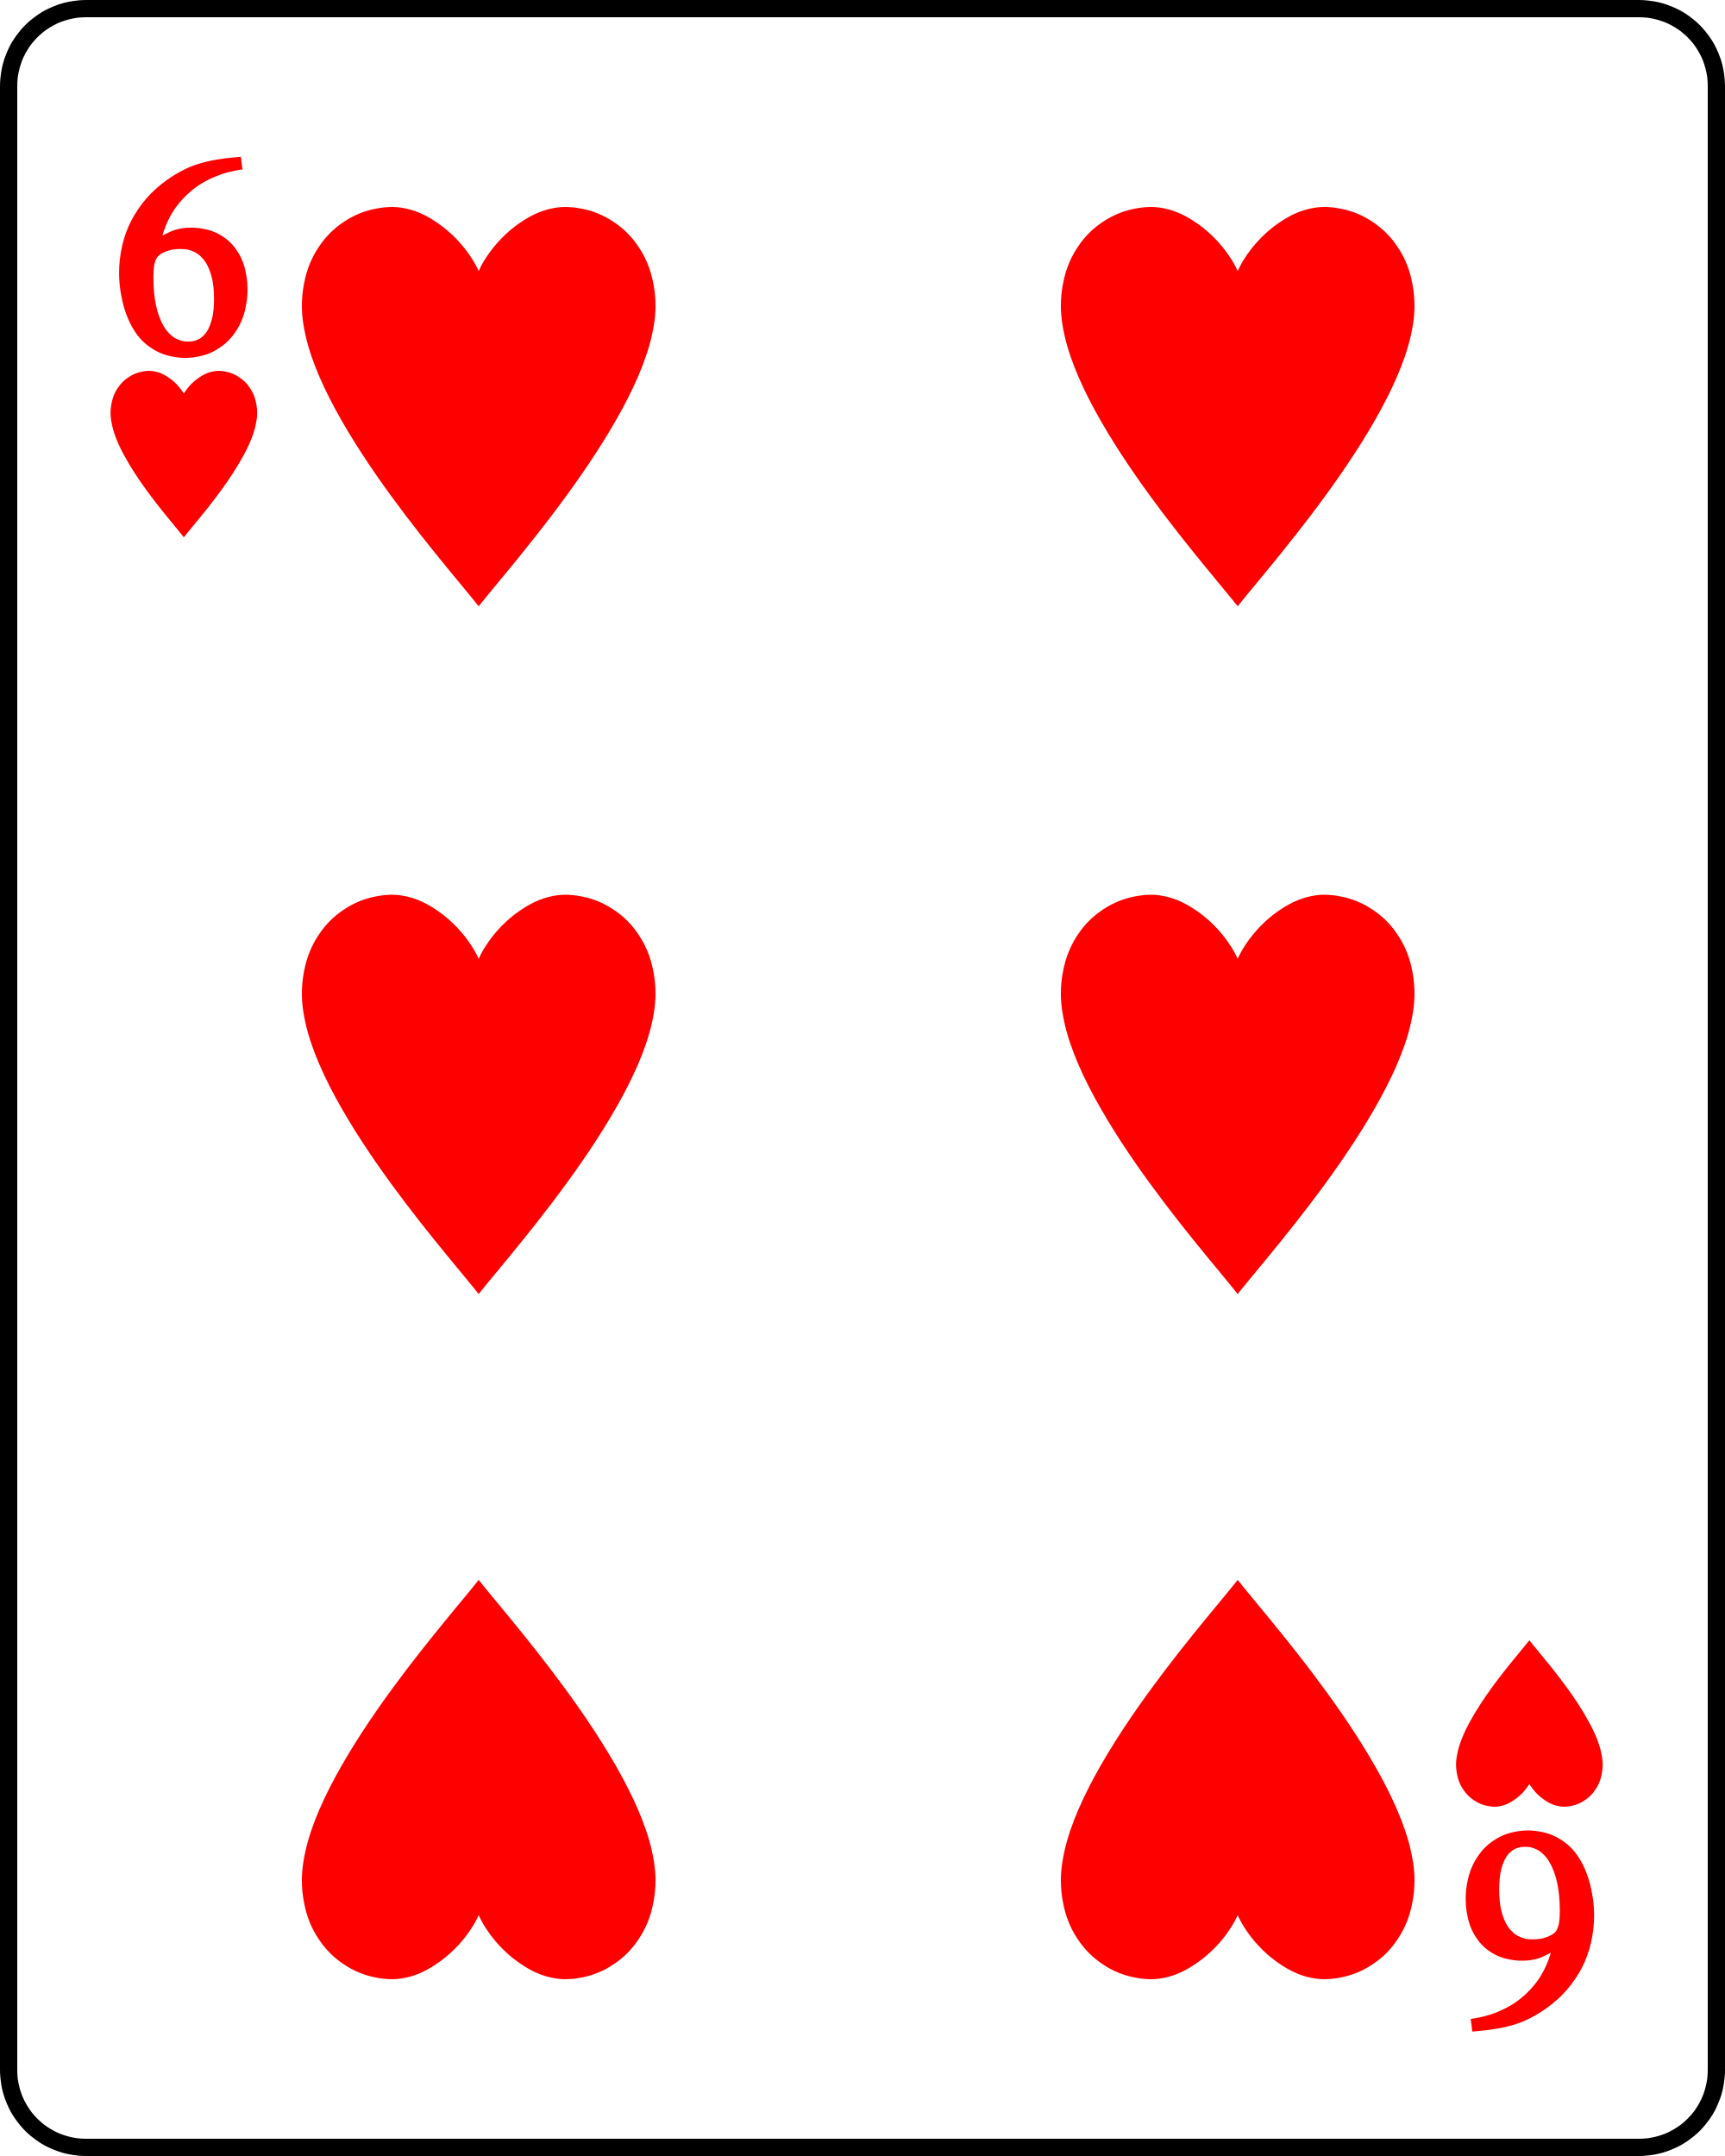 Card clipart poker. Harts cards incep imagine